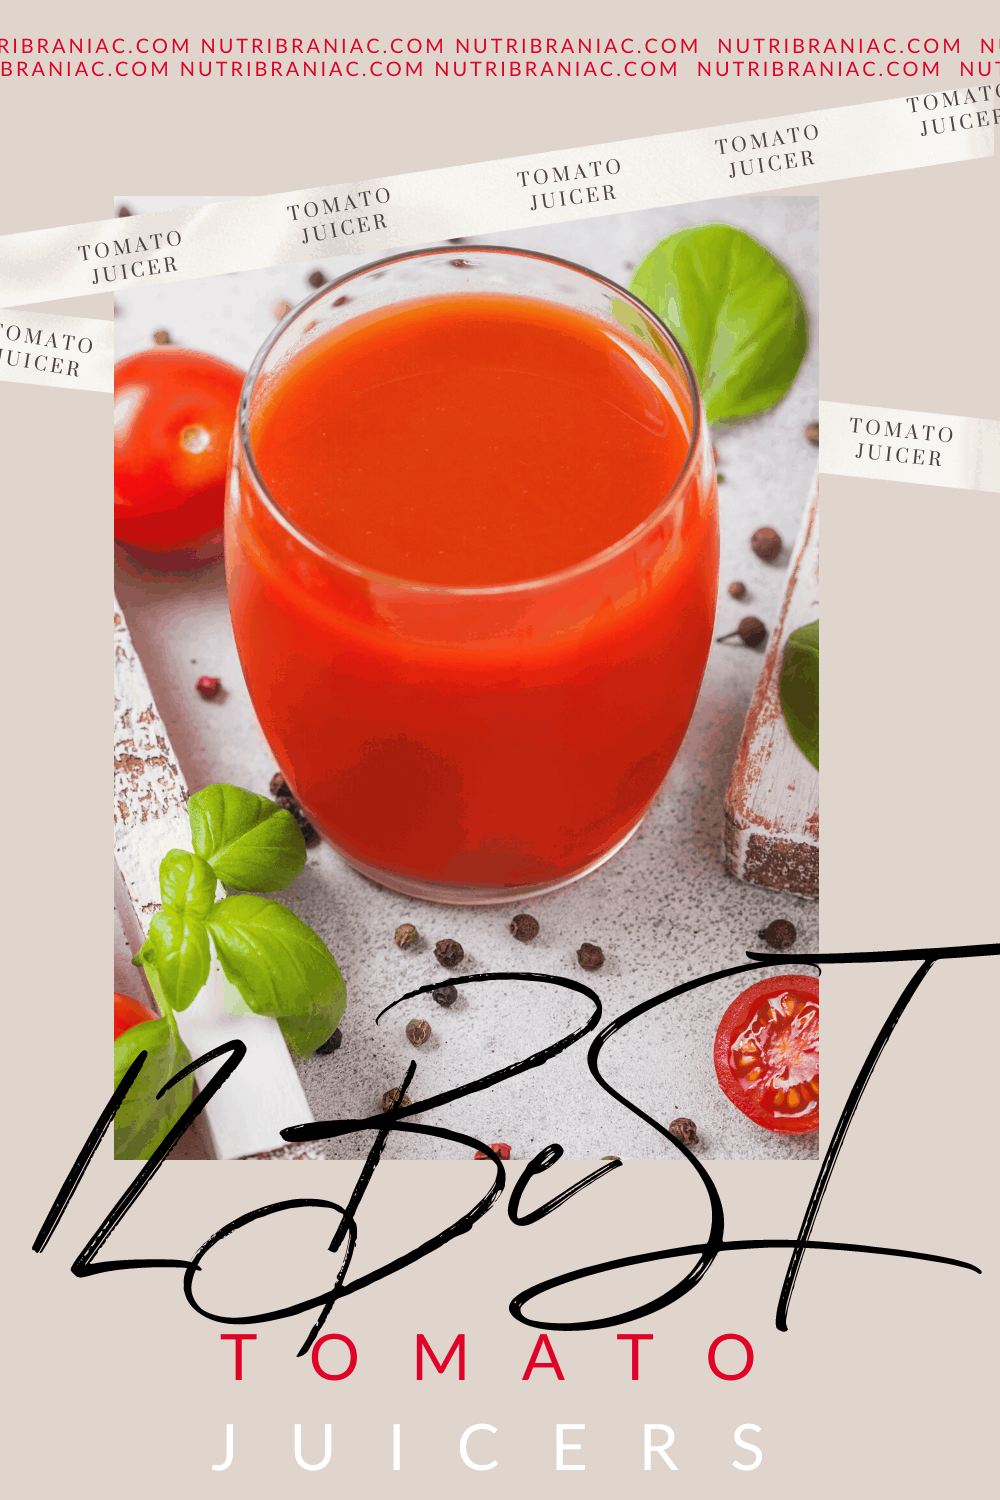 Graphic image of a glass of a tomato juice with text overlay "12 Best Tomato Juicers"